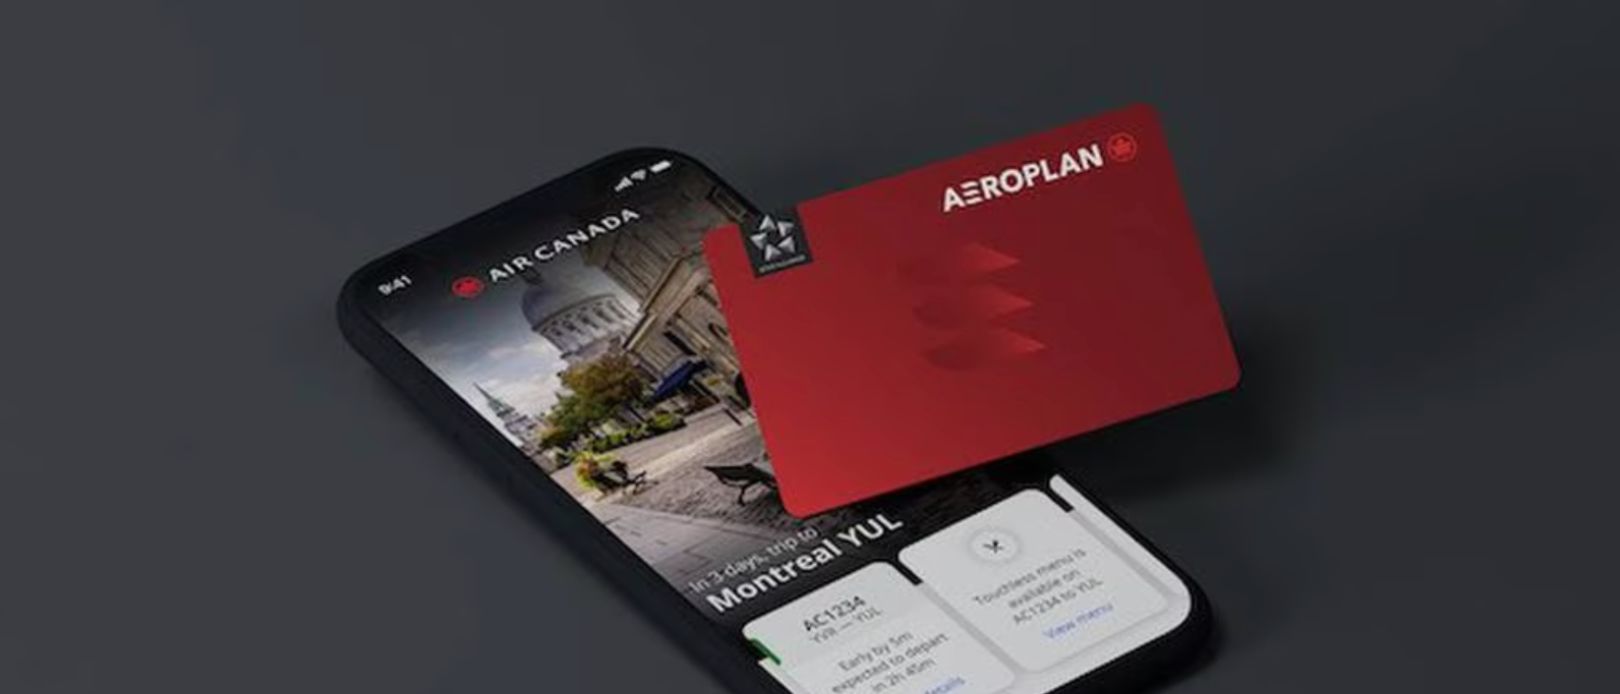 A smartphone showing the Aeroplan app with a credit card on top